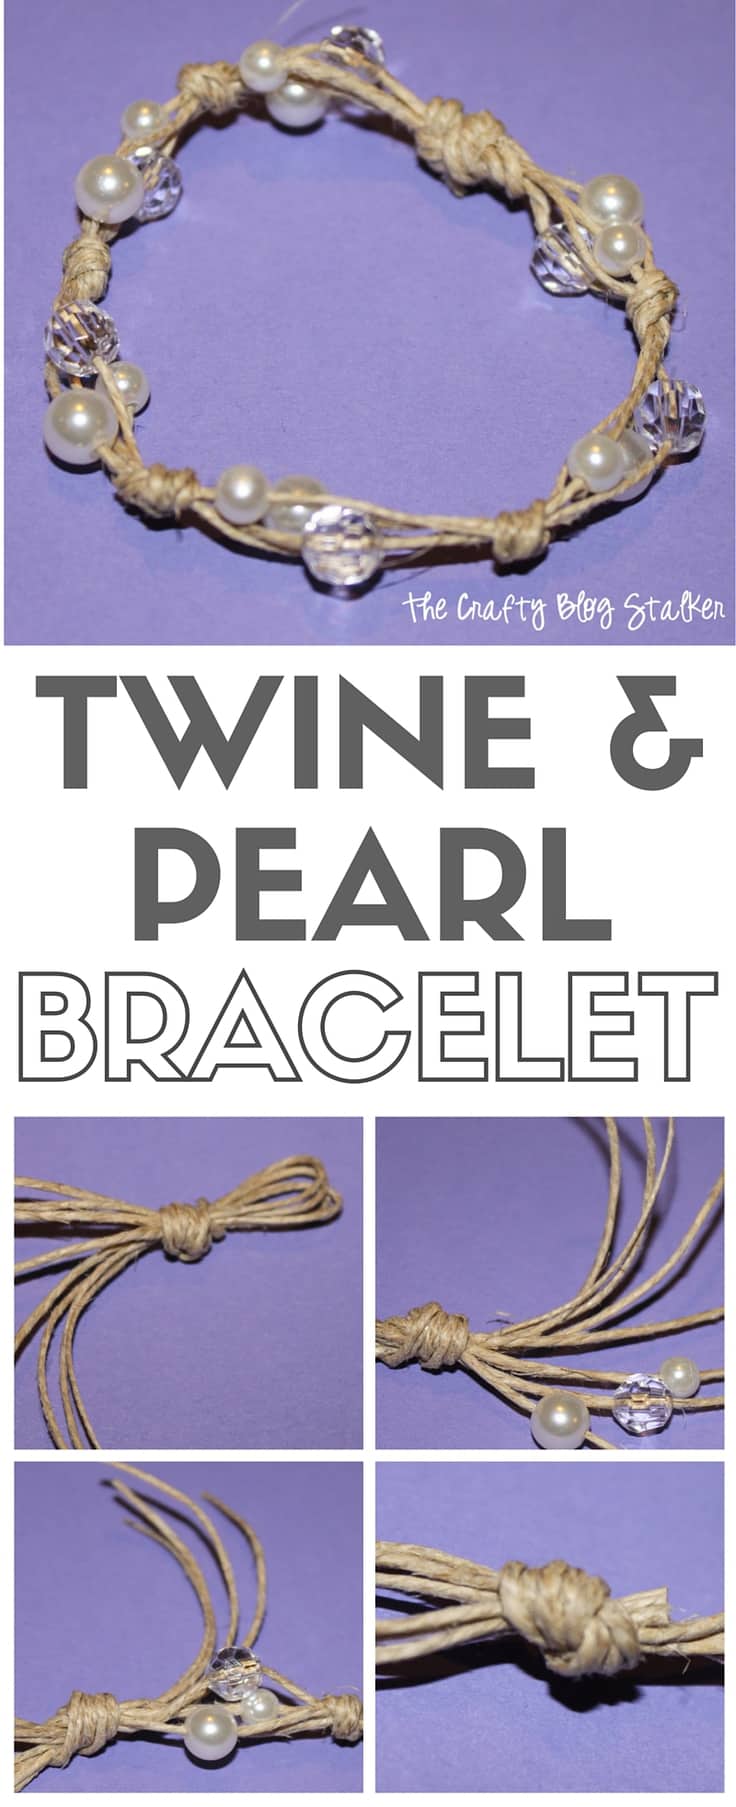 Twine and Pearl Bracelet – The Crafty Blog Stalker - Jute Craft Ideas / DIY Projects with Twine featured on Kenarry.com